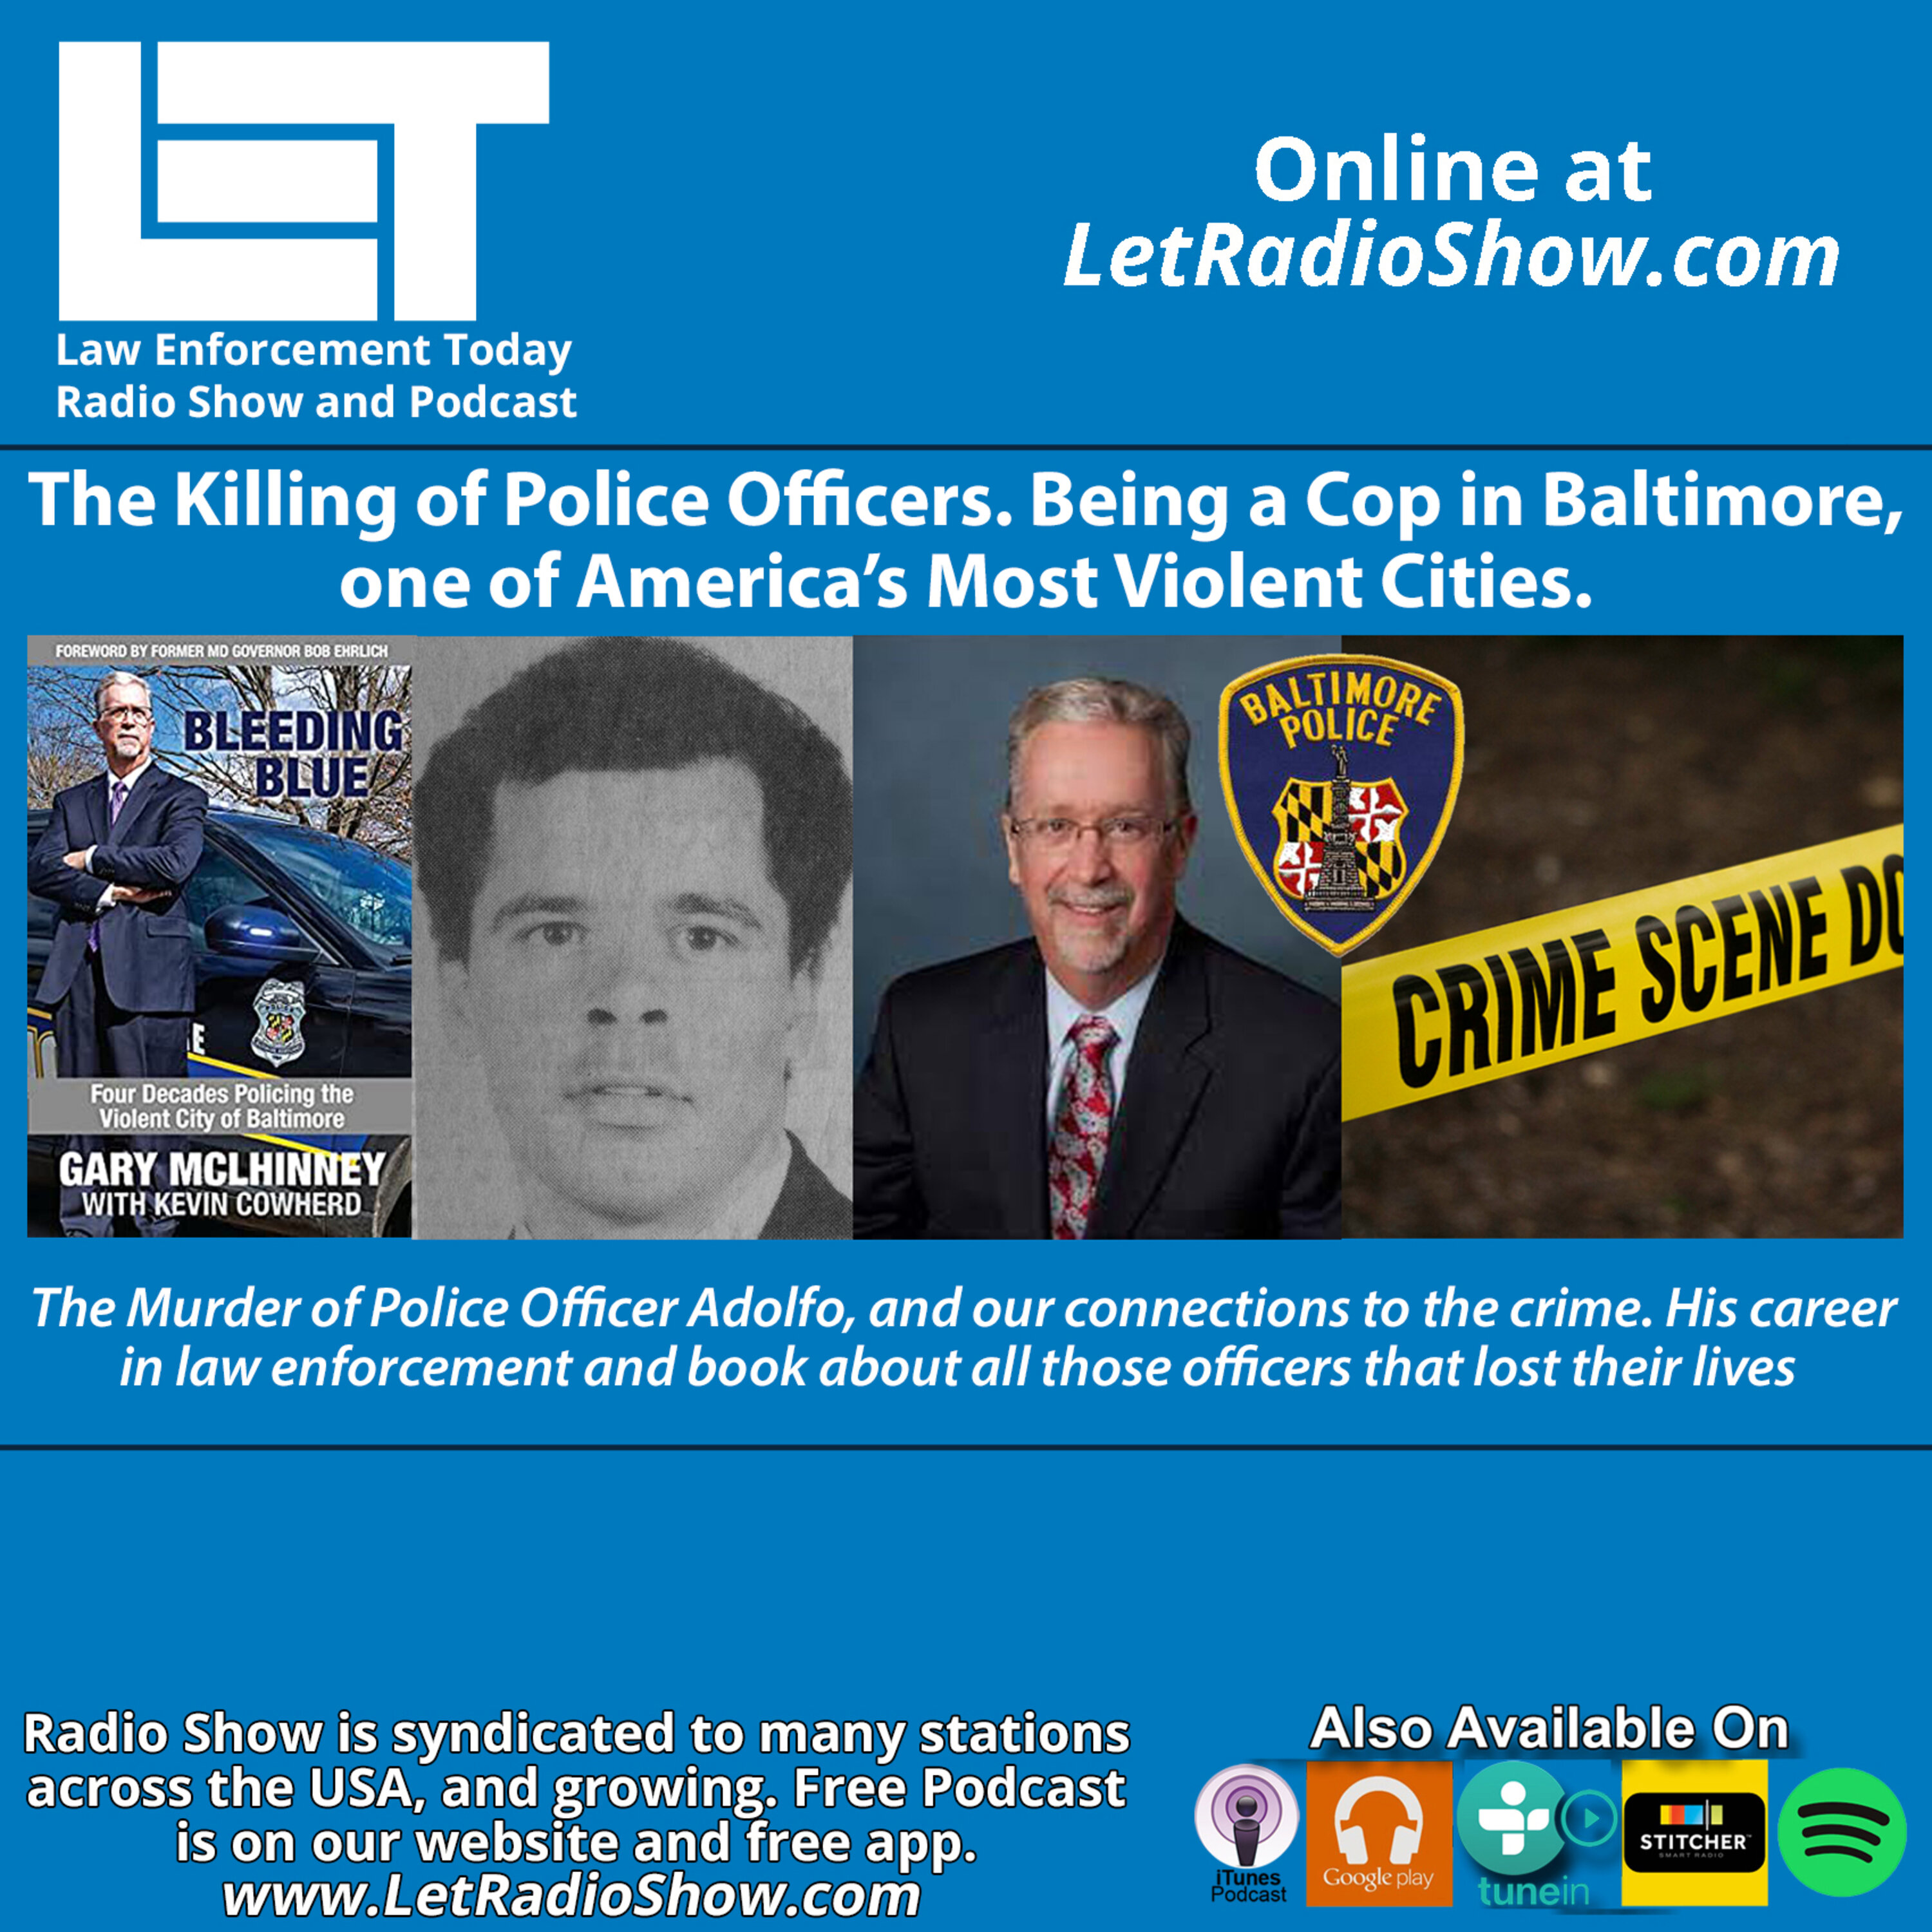 S6E73: The Killing of Police Officers. Being a Cop in Baltimore, one of America’s Most Violent Cities. Image